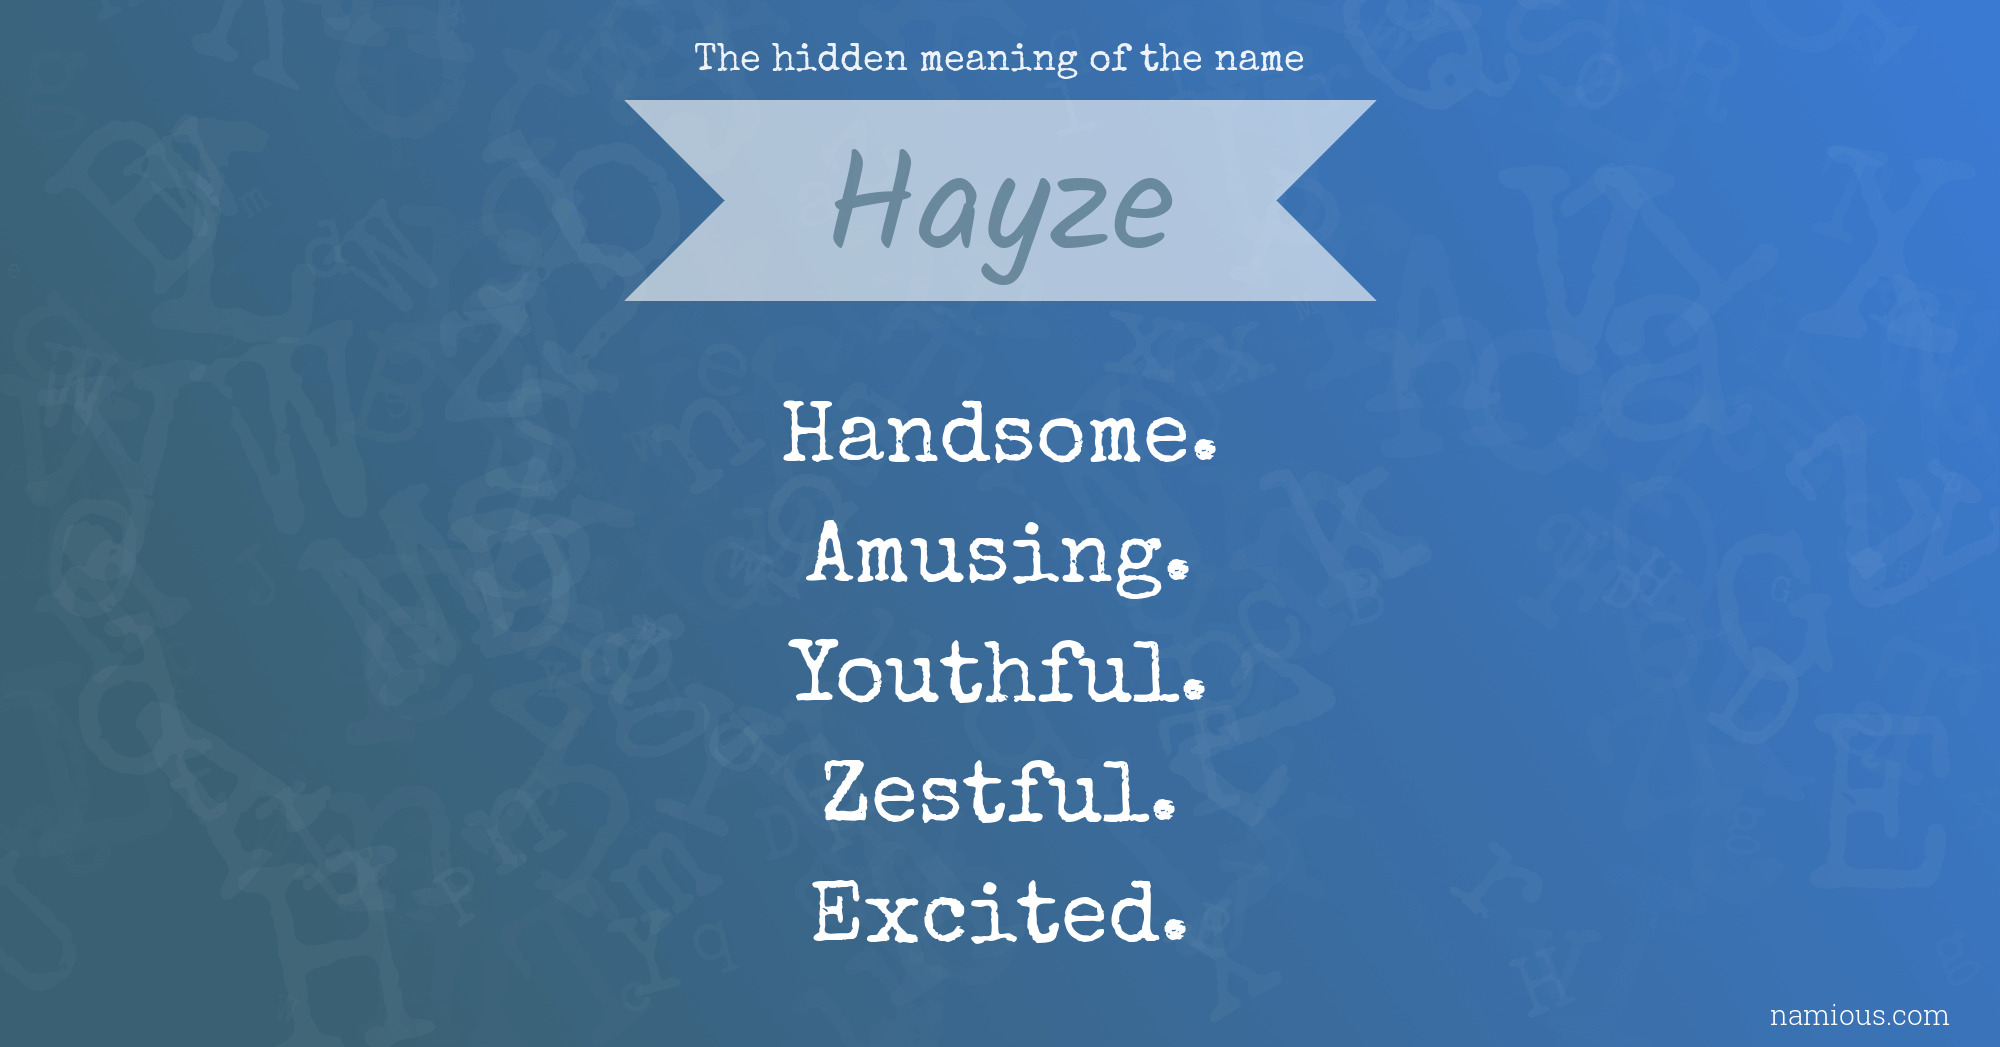 The hidden meaning of the name Hayze